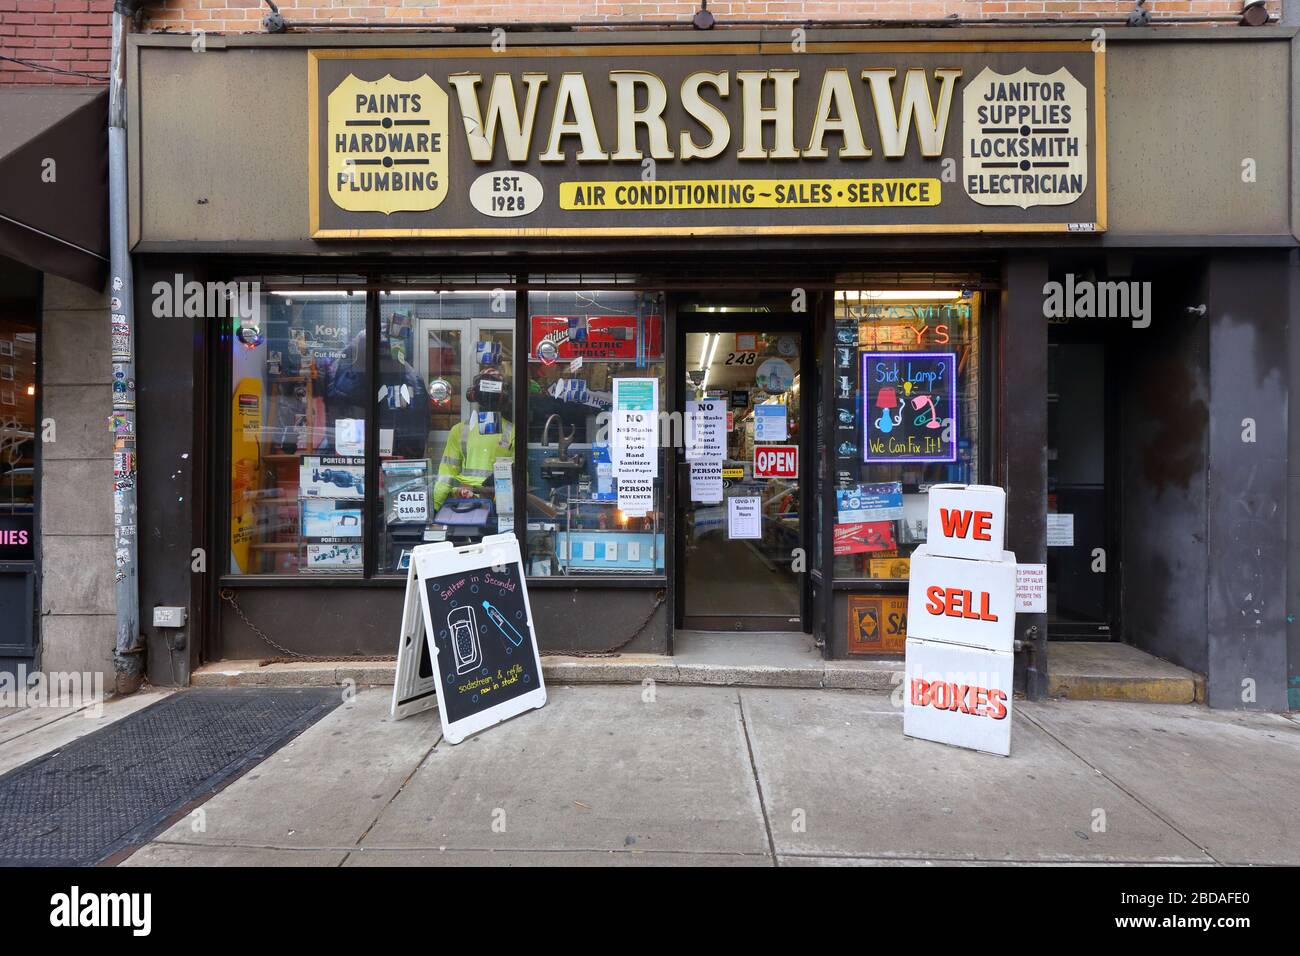 Warshaw Hardware, 248 3rd Avenue, New York, NYC storefront photo of a hardware store in the Gramercy neighborhood of Manhattan. Stock Photo